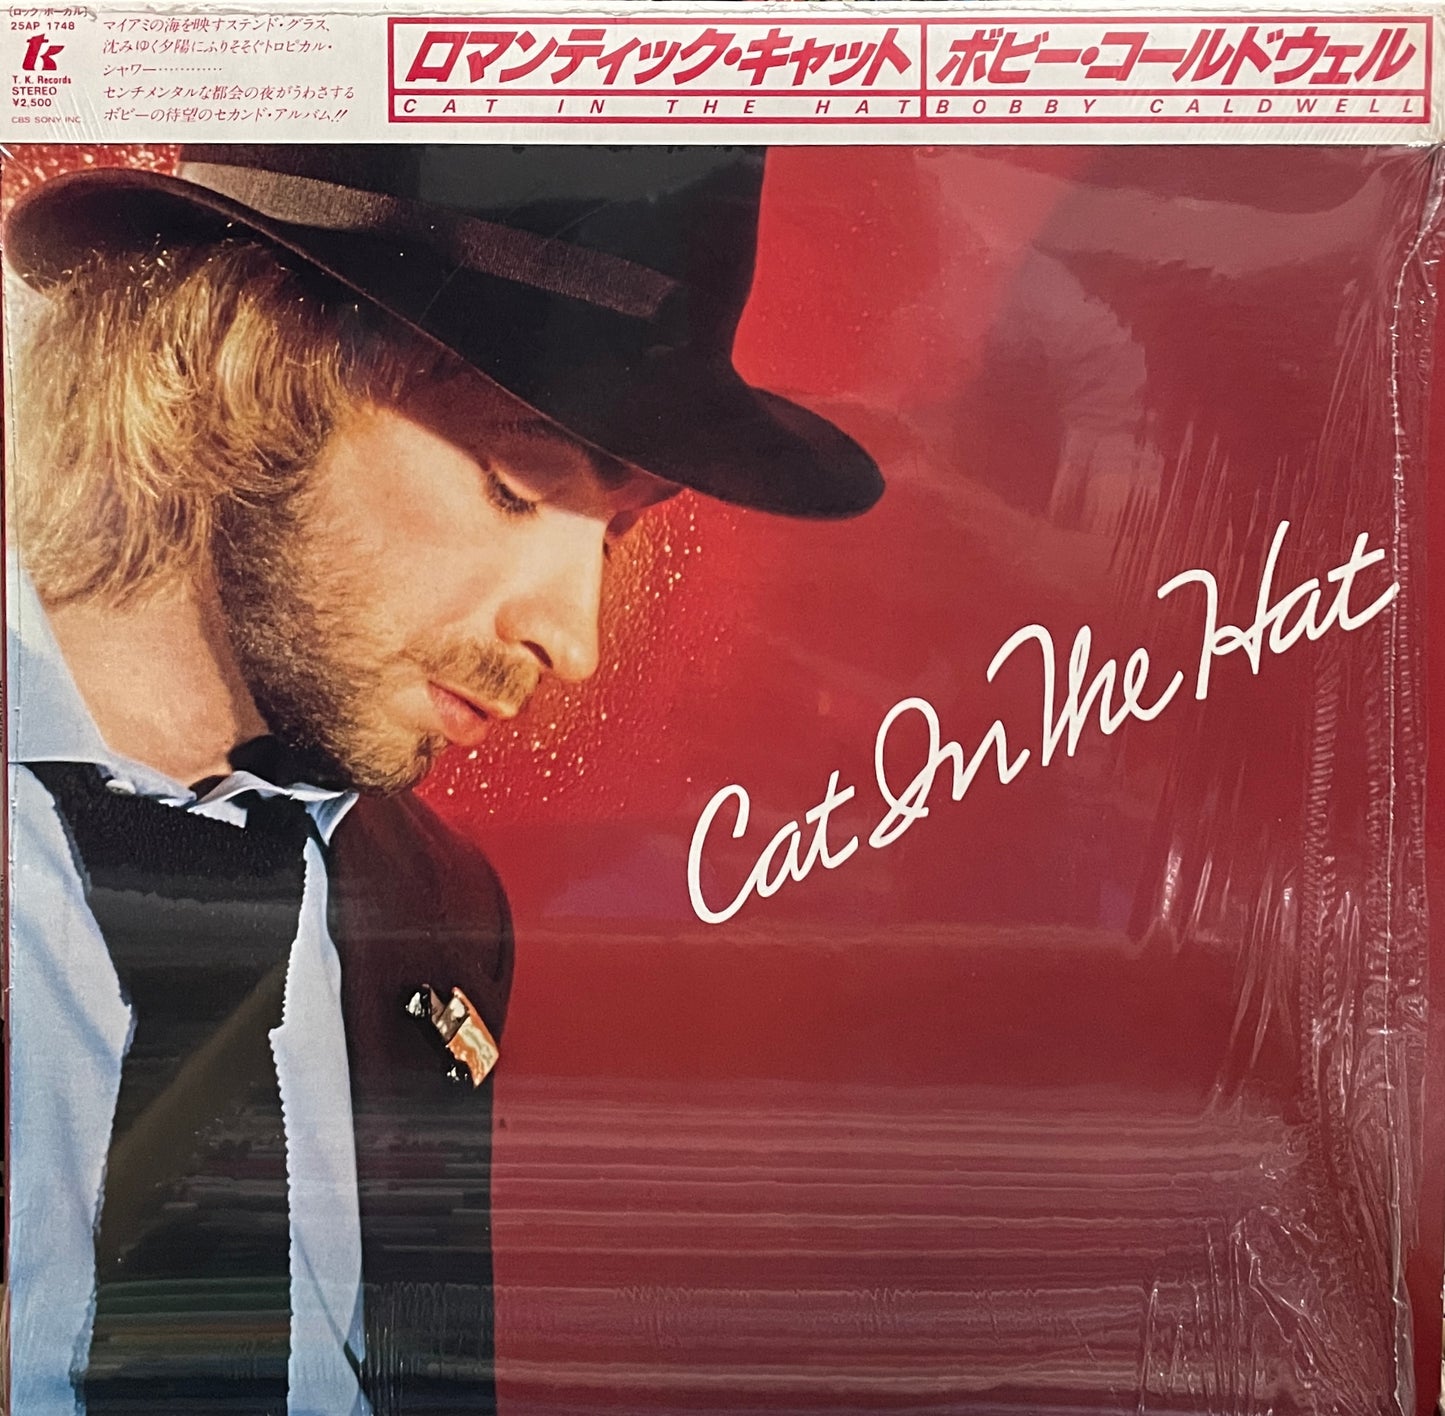 Bobby Caldwell " Cat In The Hat" (1980)